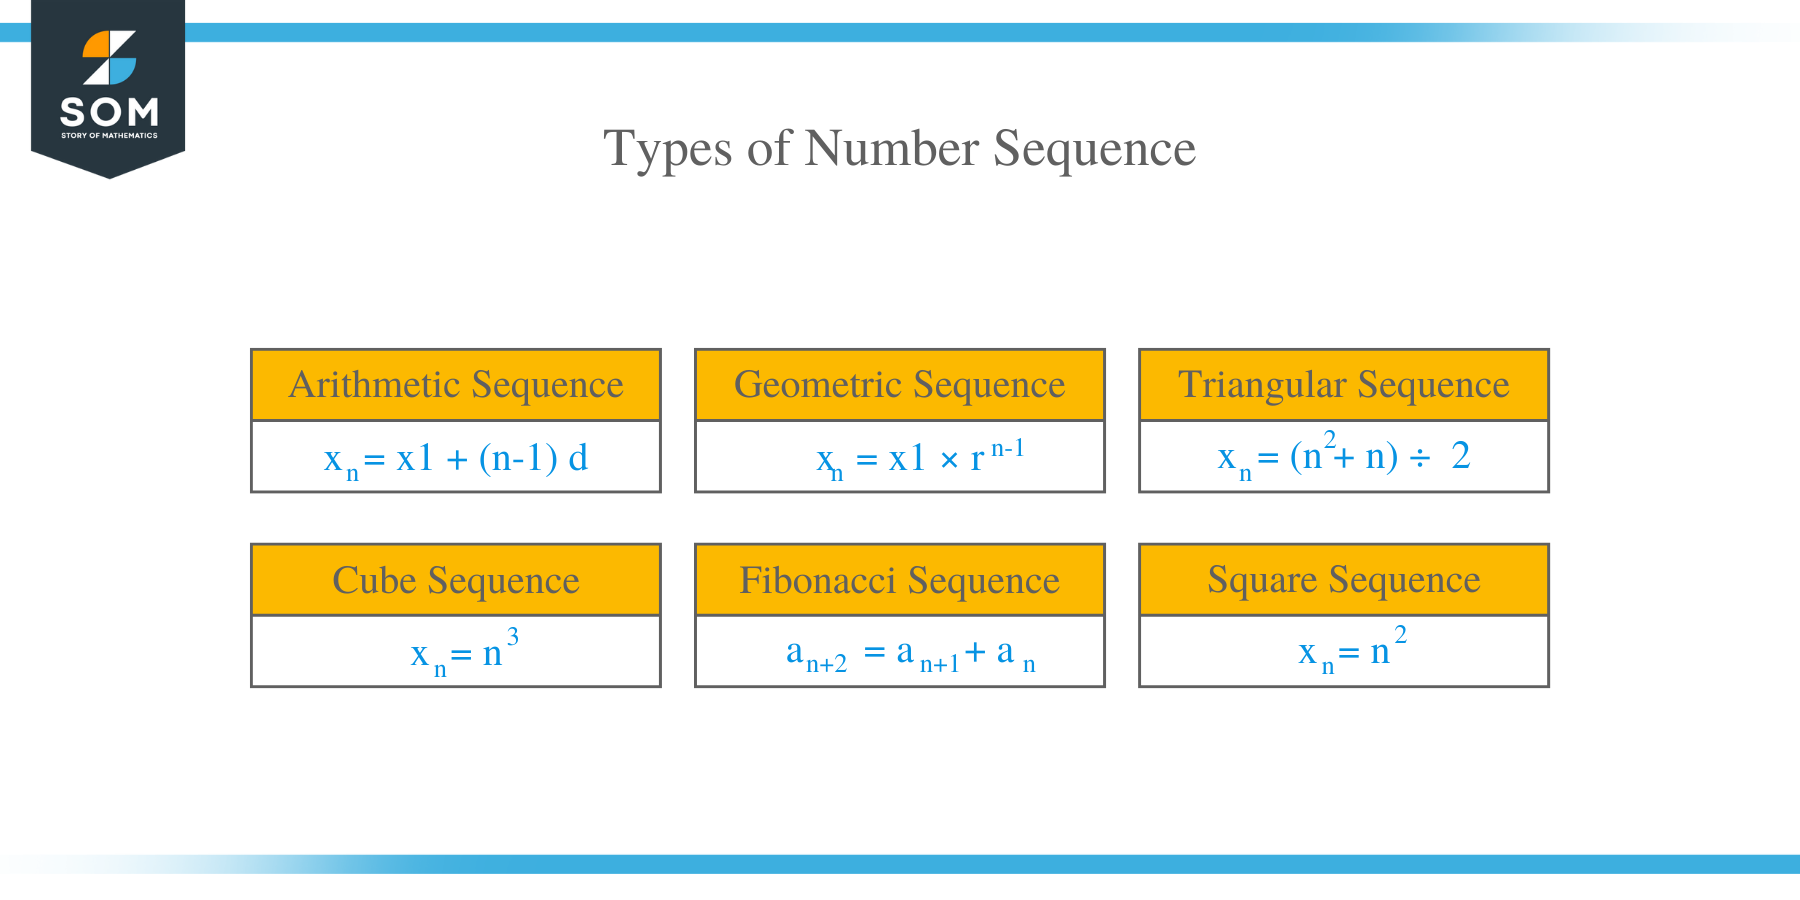 What are the Types of Number Sequence?